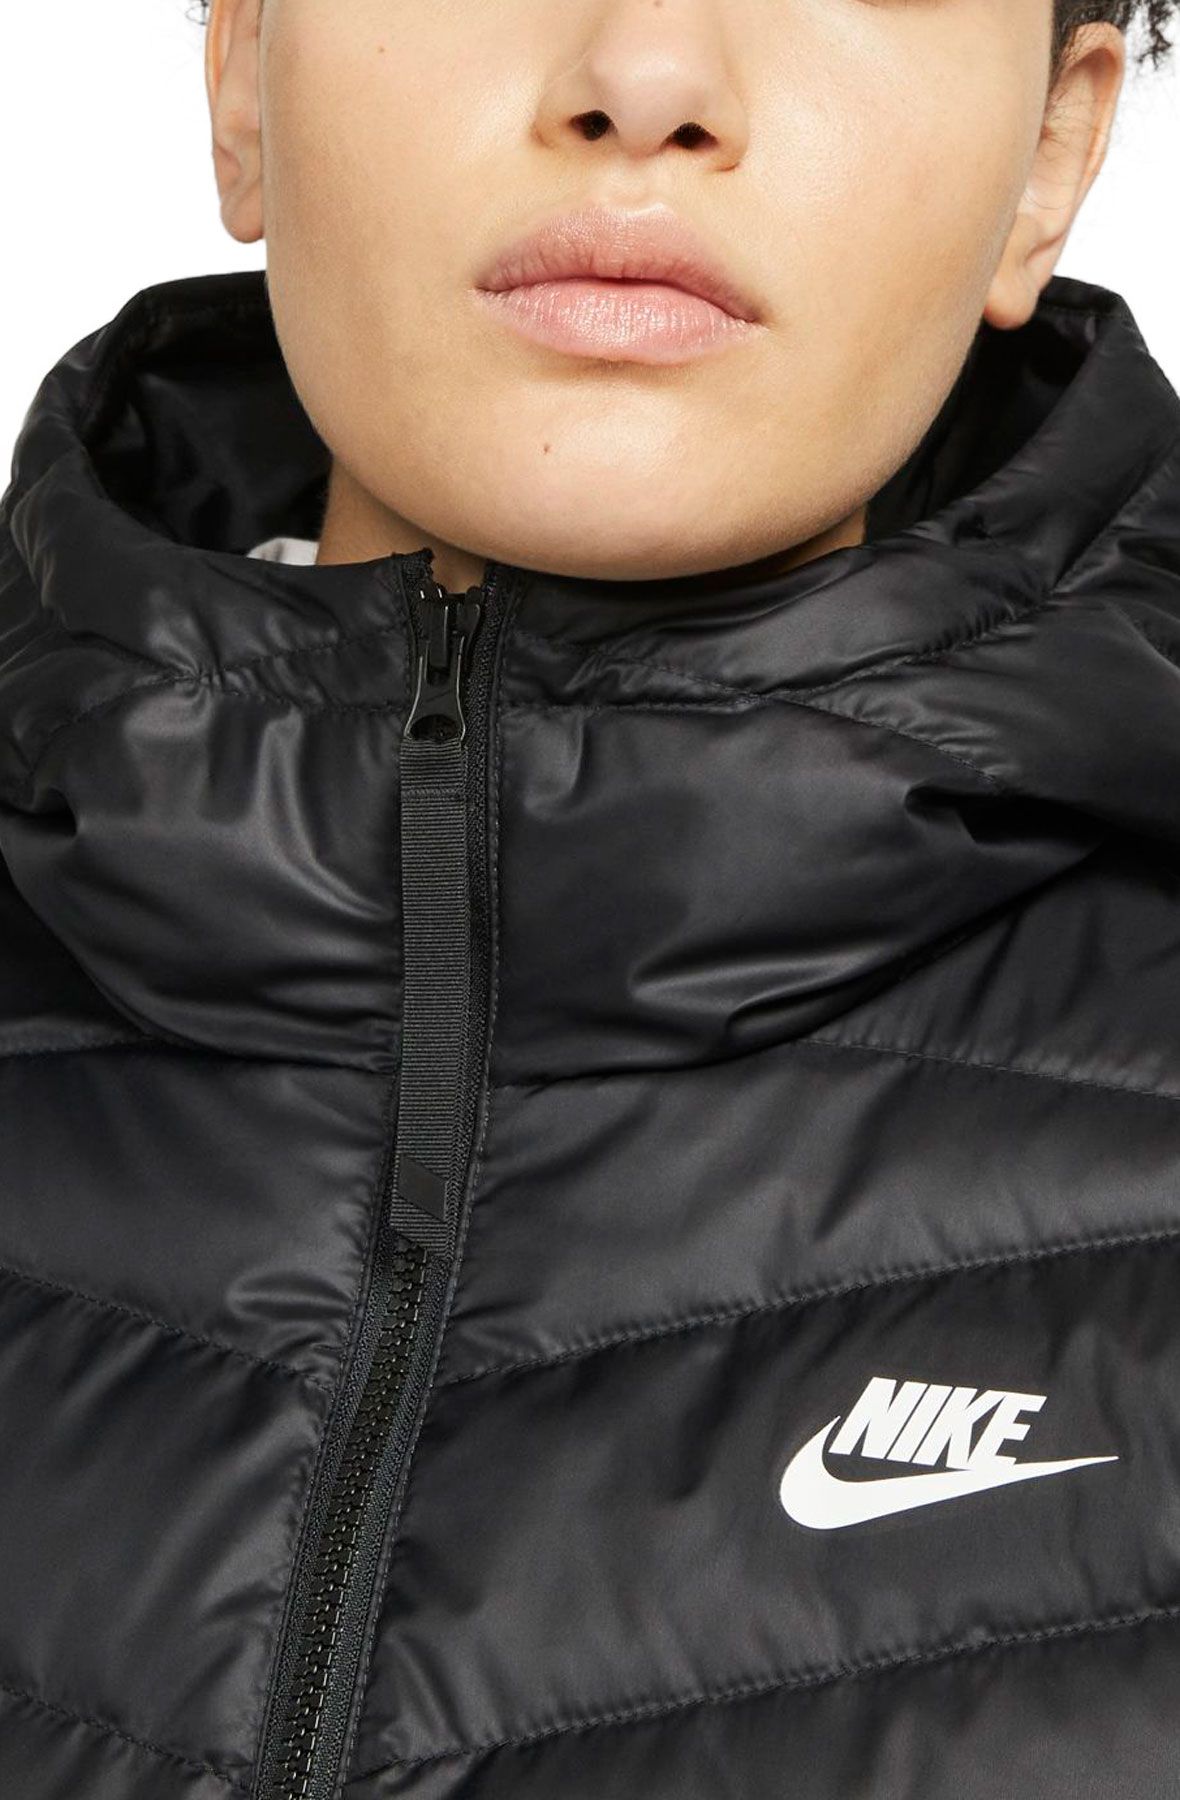 NIKE Sportswear Therma-FIT Repel Windrunner Jacket DH4073 010 - Shiekh